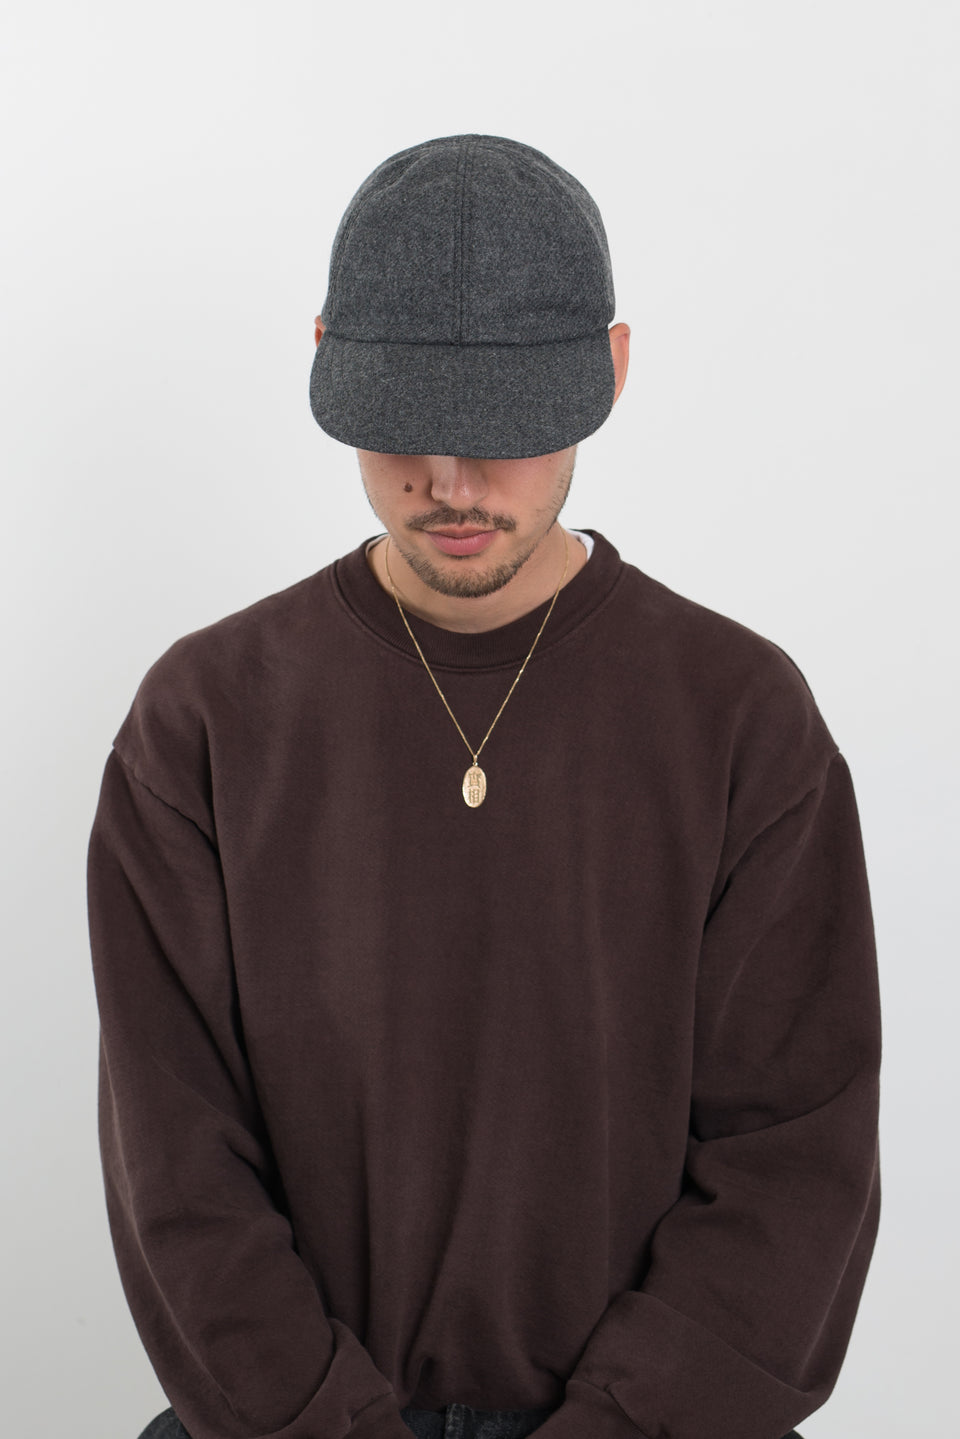 Found Feather Japan FW22 Classic 6 Panel Cap Mélange Wool Charcoal Calculus Victoria BC Canada